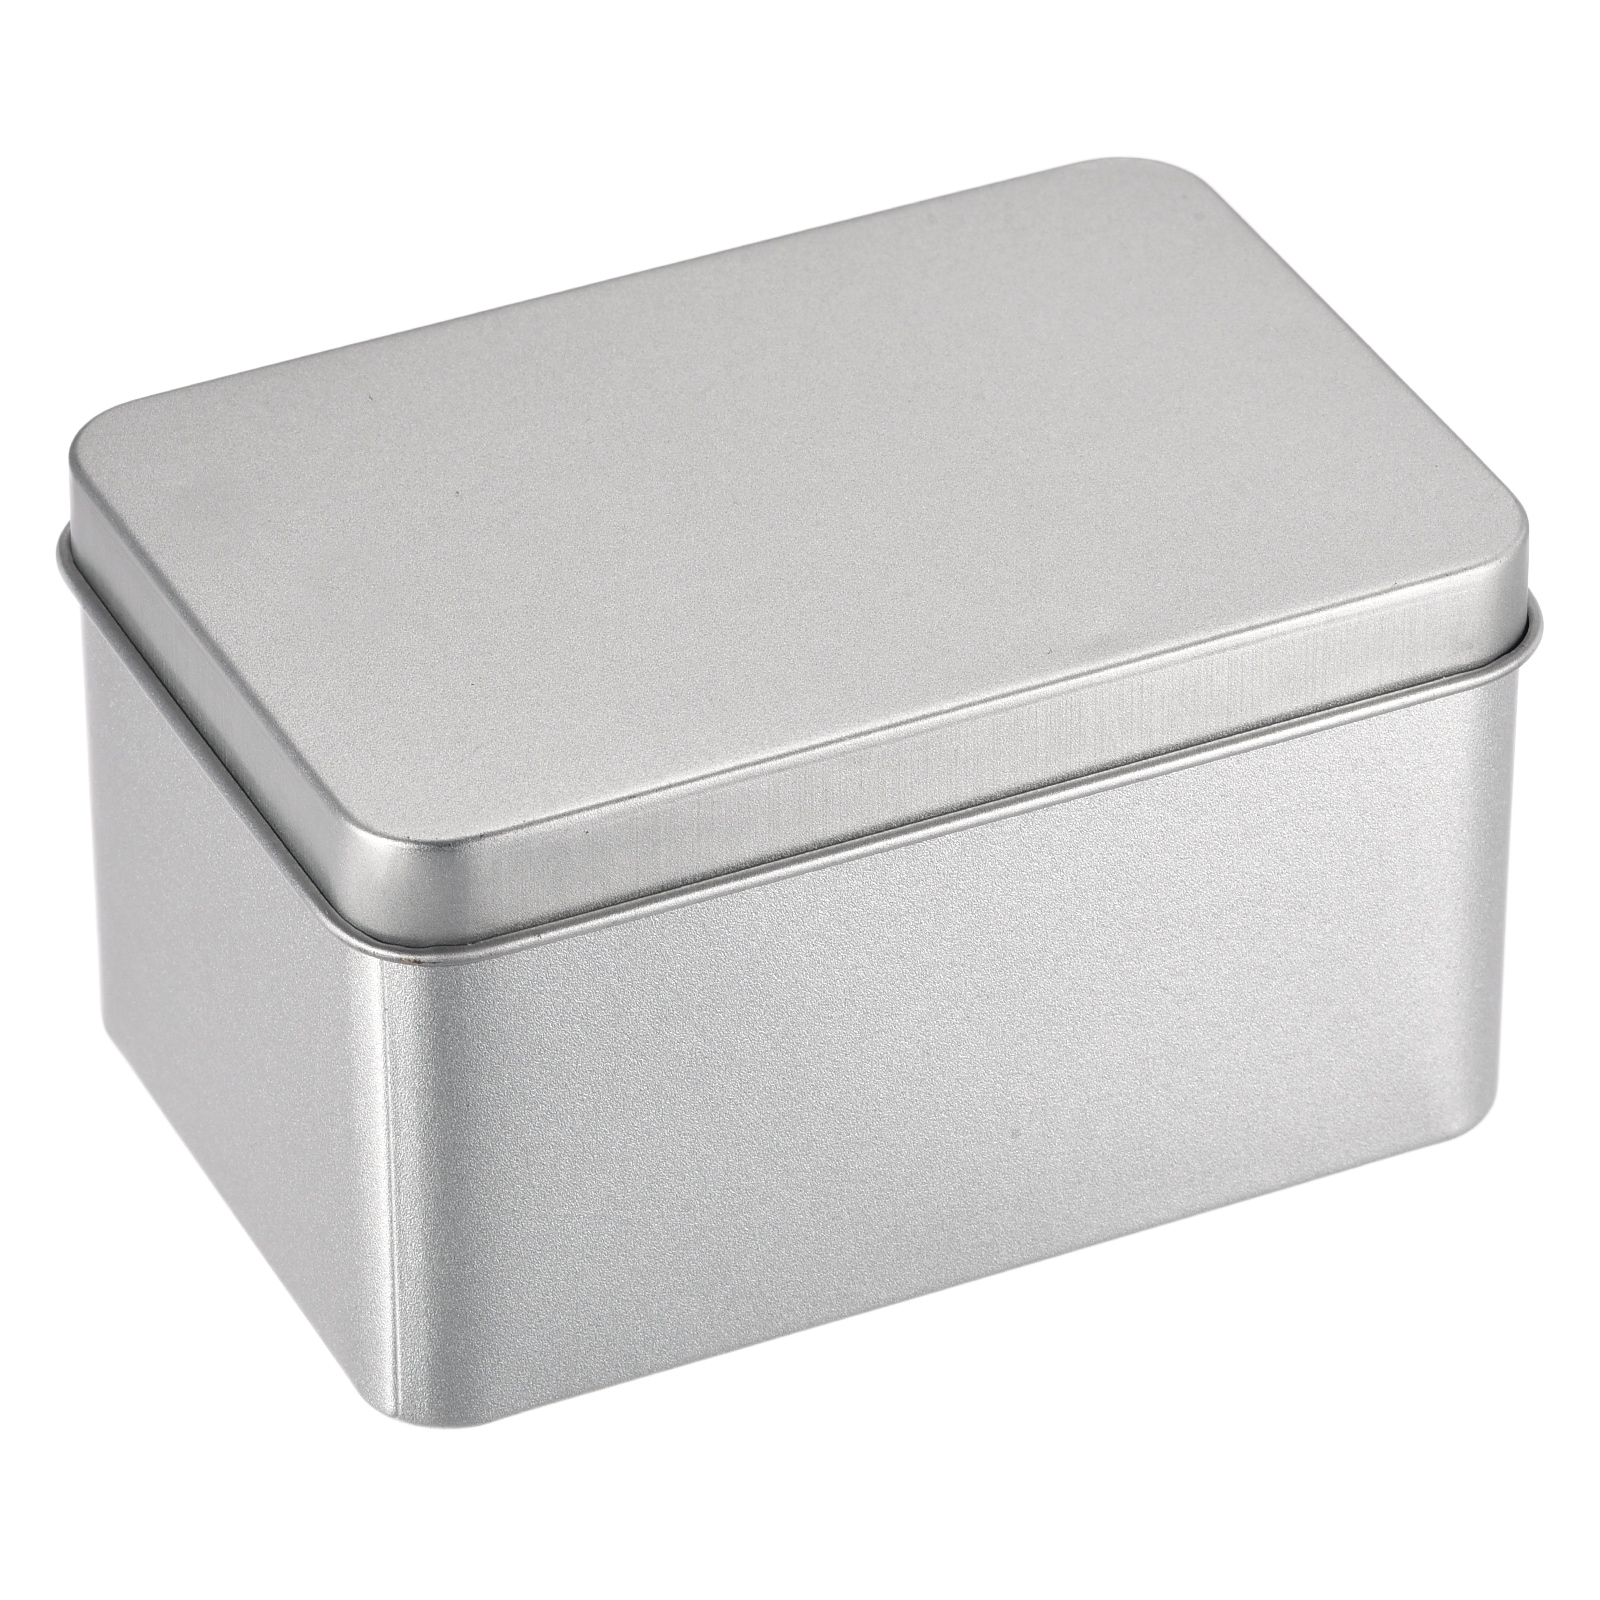 https://ak1.ostkcdn.com/images/products/is/images/direct/baf98c12c04b7fada6ce1895be344d544db03317/Metal-Tin-Box%2C-4pcs-3.74%22-x-2.36%22-x-0.87%22-Containers-with-Lids%2C-Silver.jpg